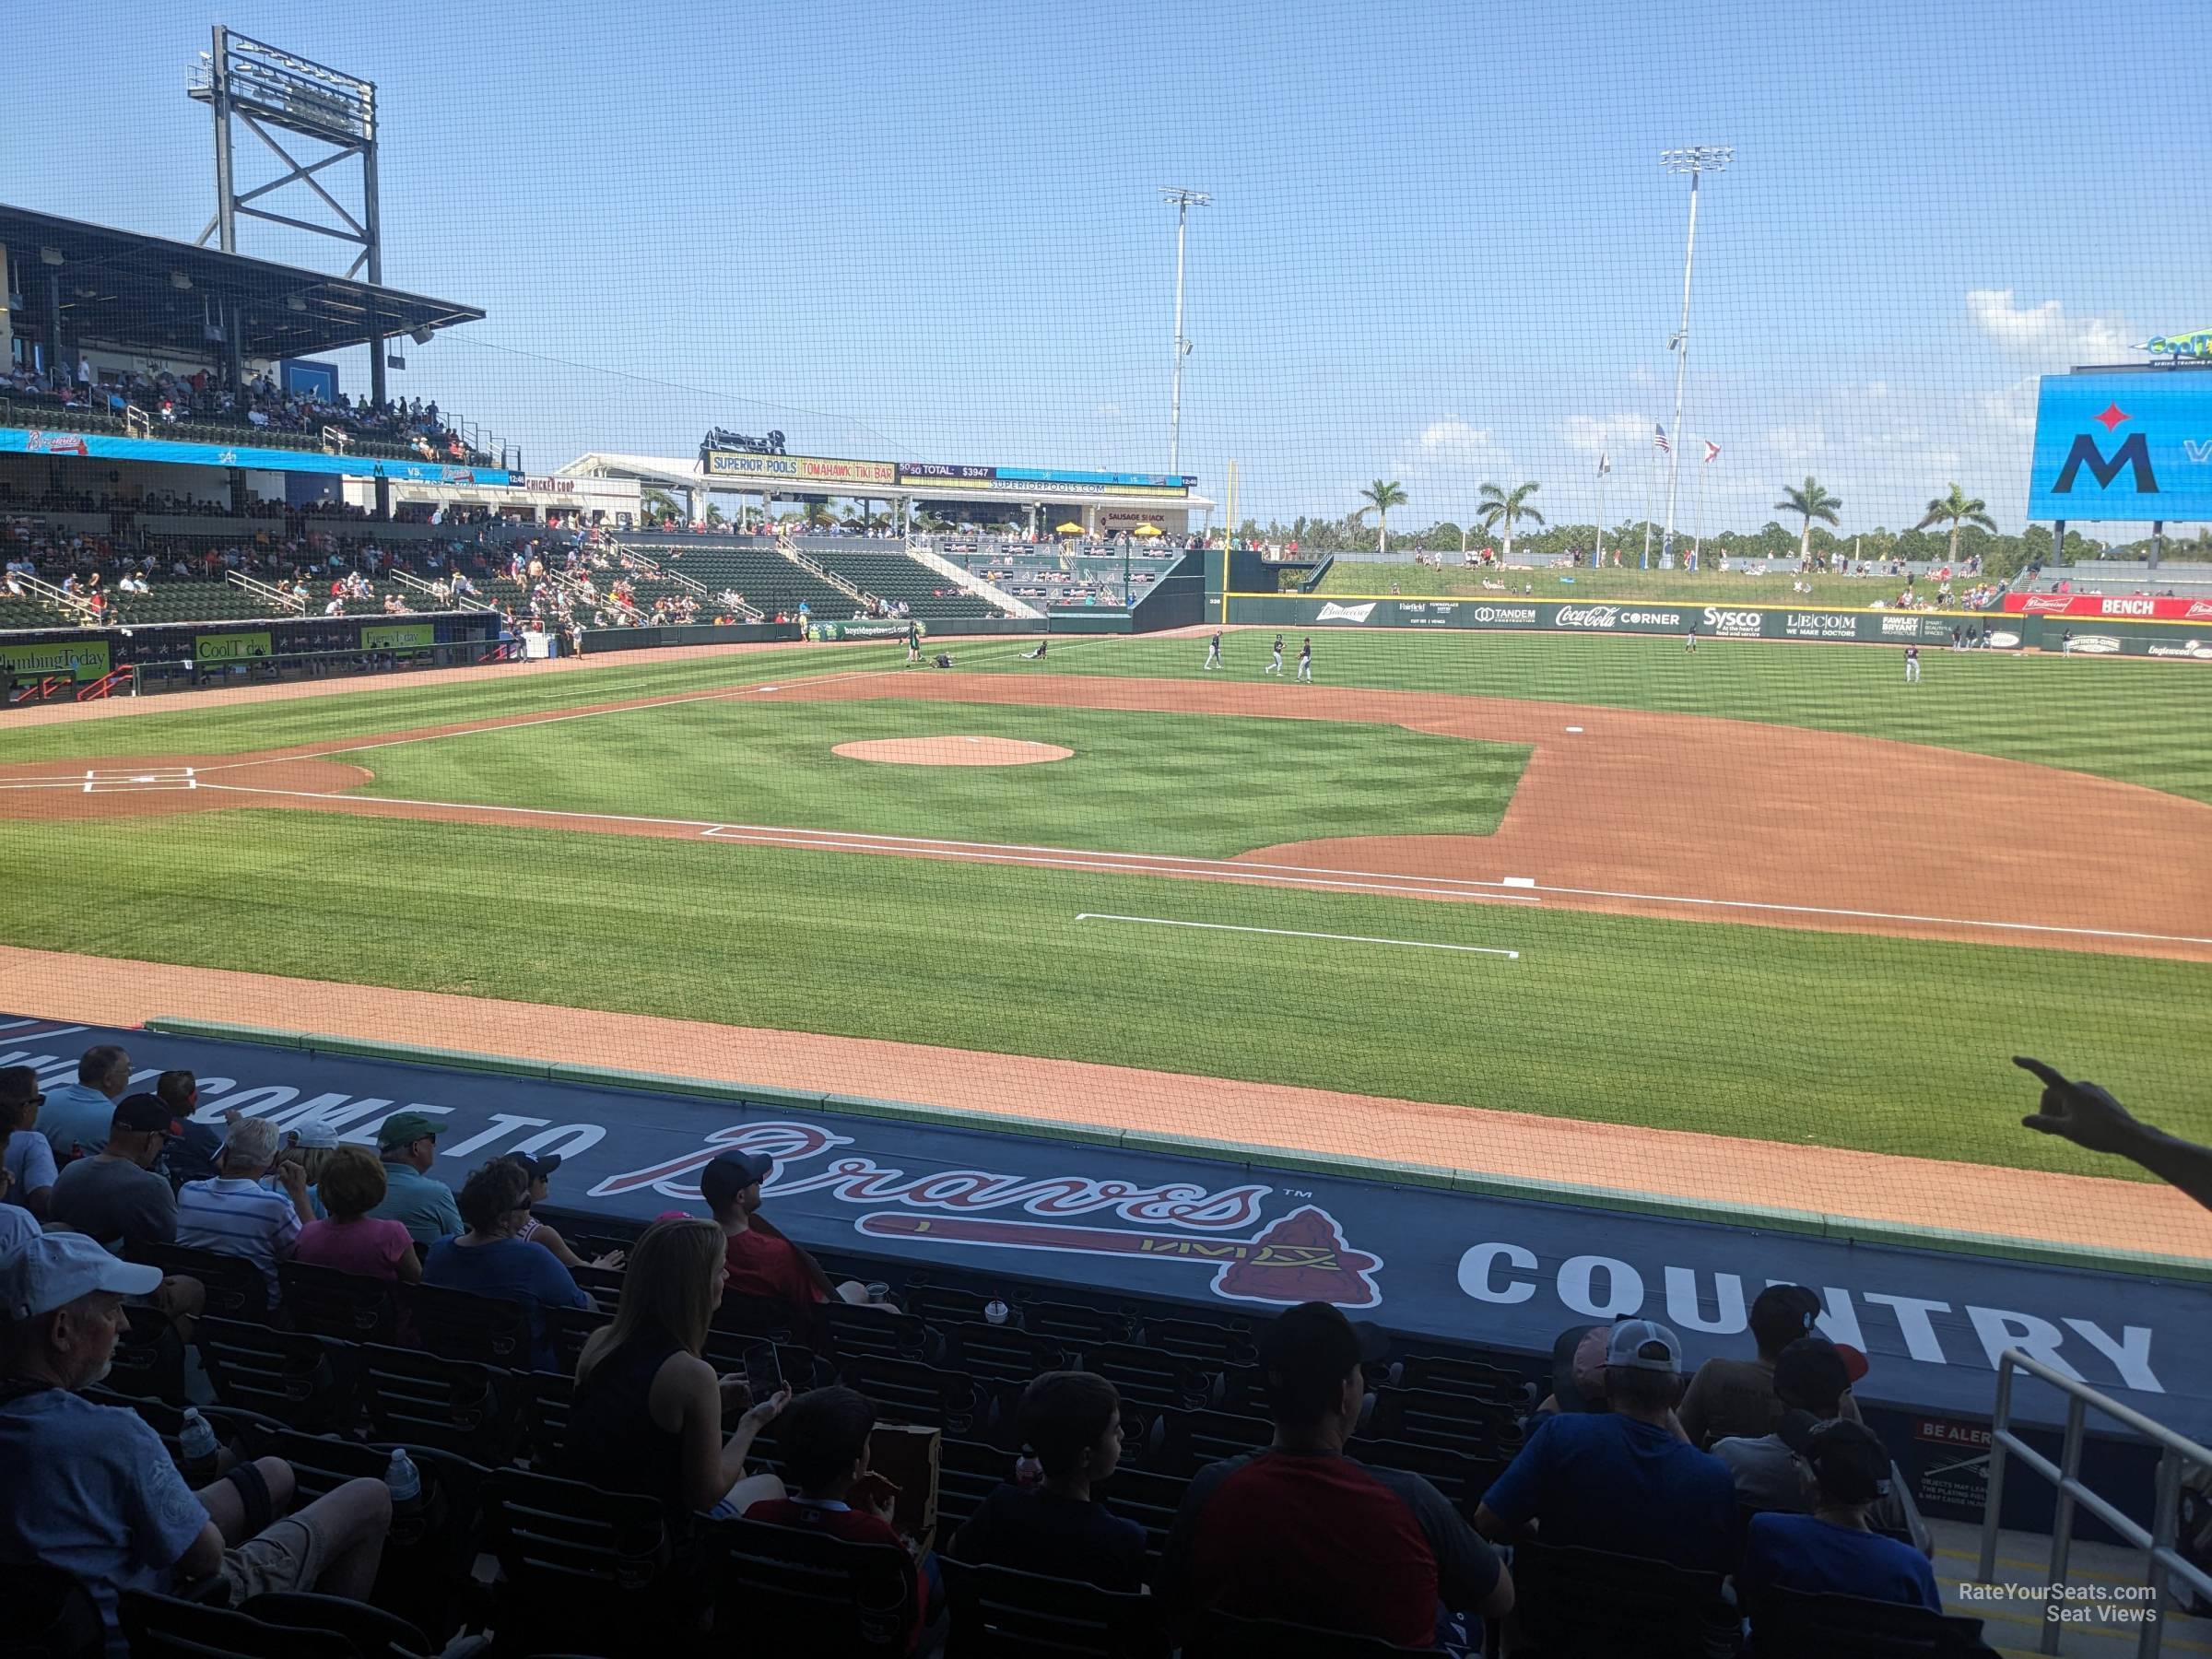 section 108, row 13 seat view  - cooltoday park